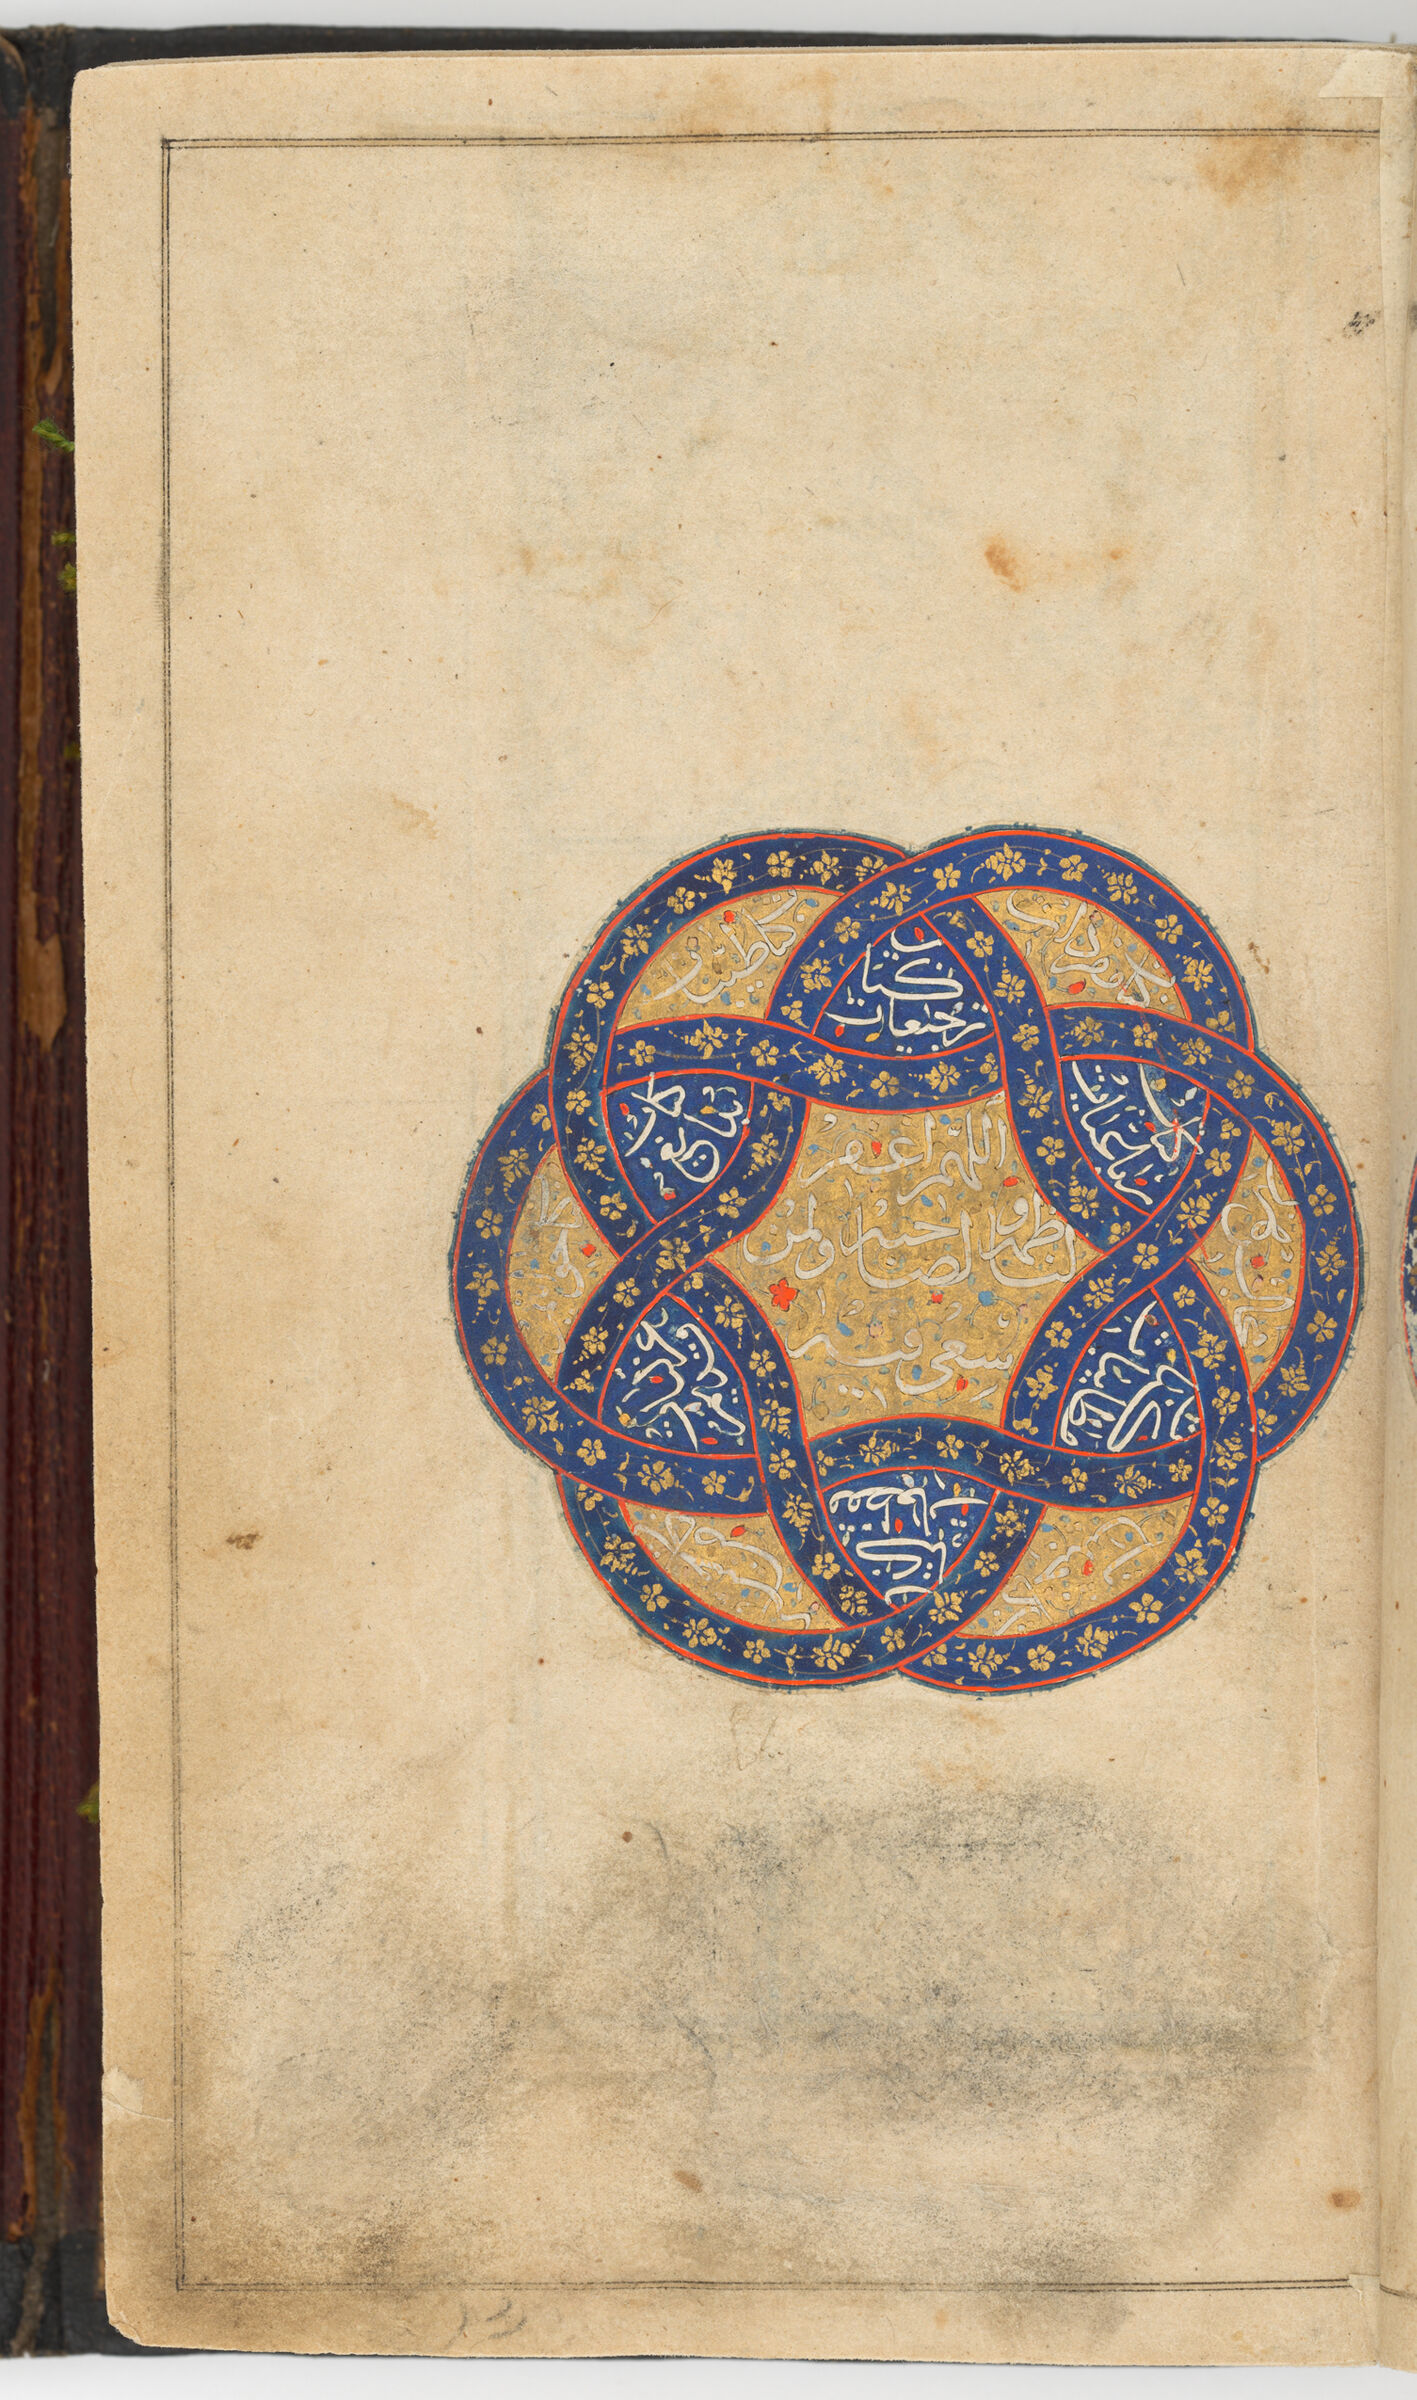 Folio With An Illuminated Roundel And Illuminated Heading (Illuminatied Recto; Illuminated Heading Verso Of Folio 3), From A Manuscript Of The Kulliyat Of Sa‘di